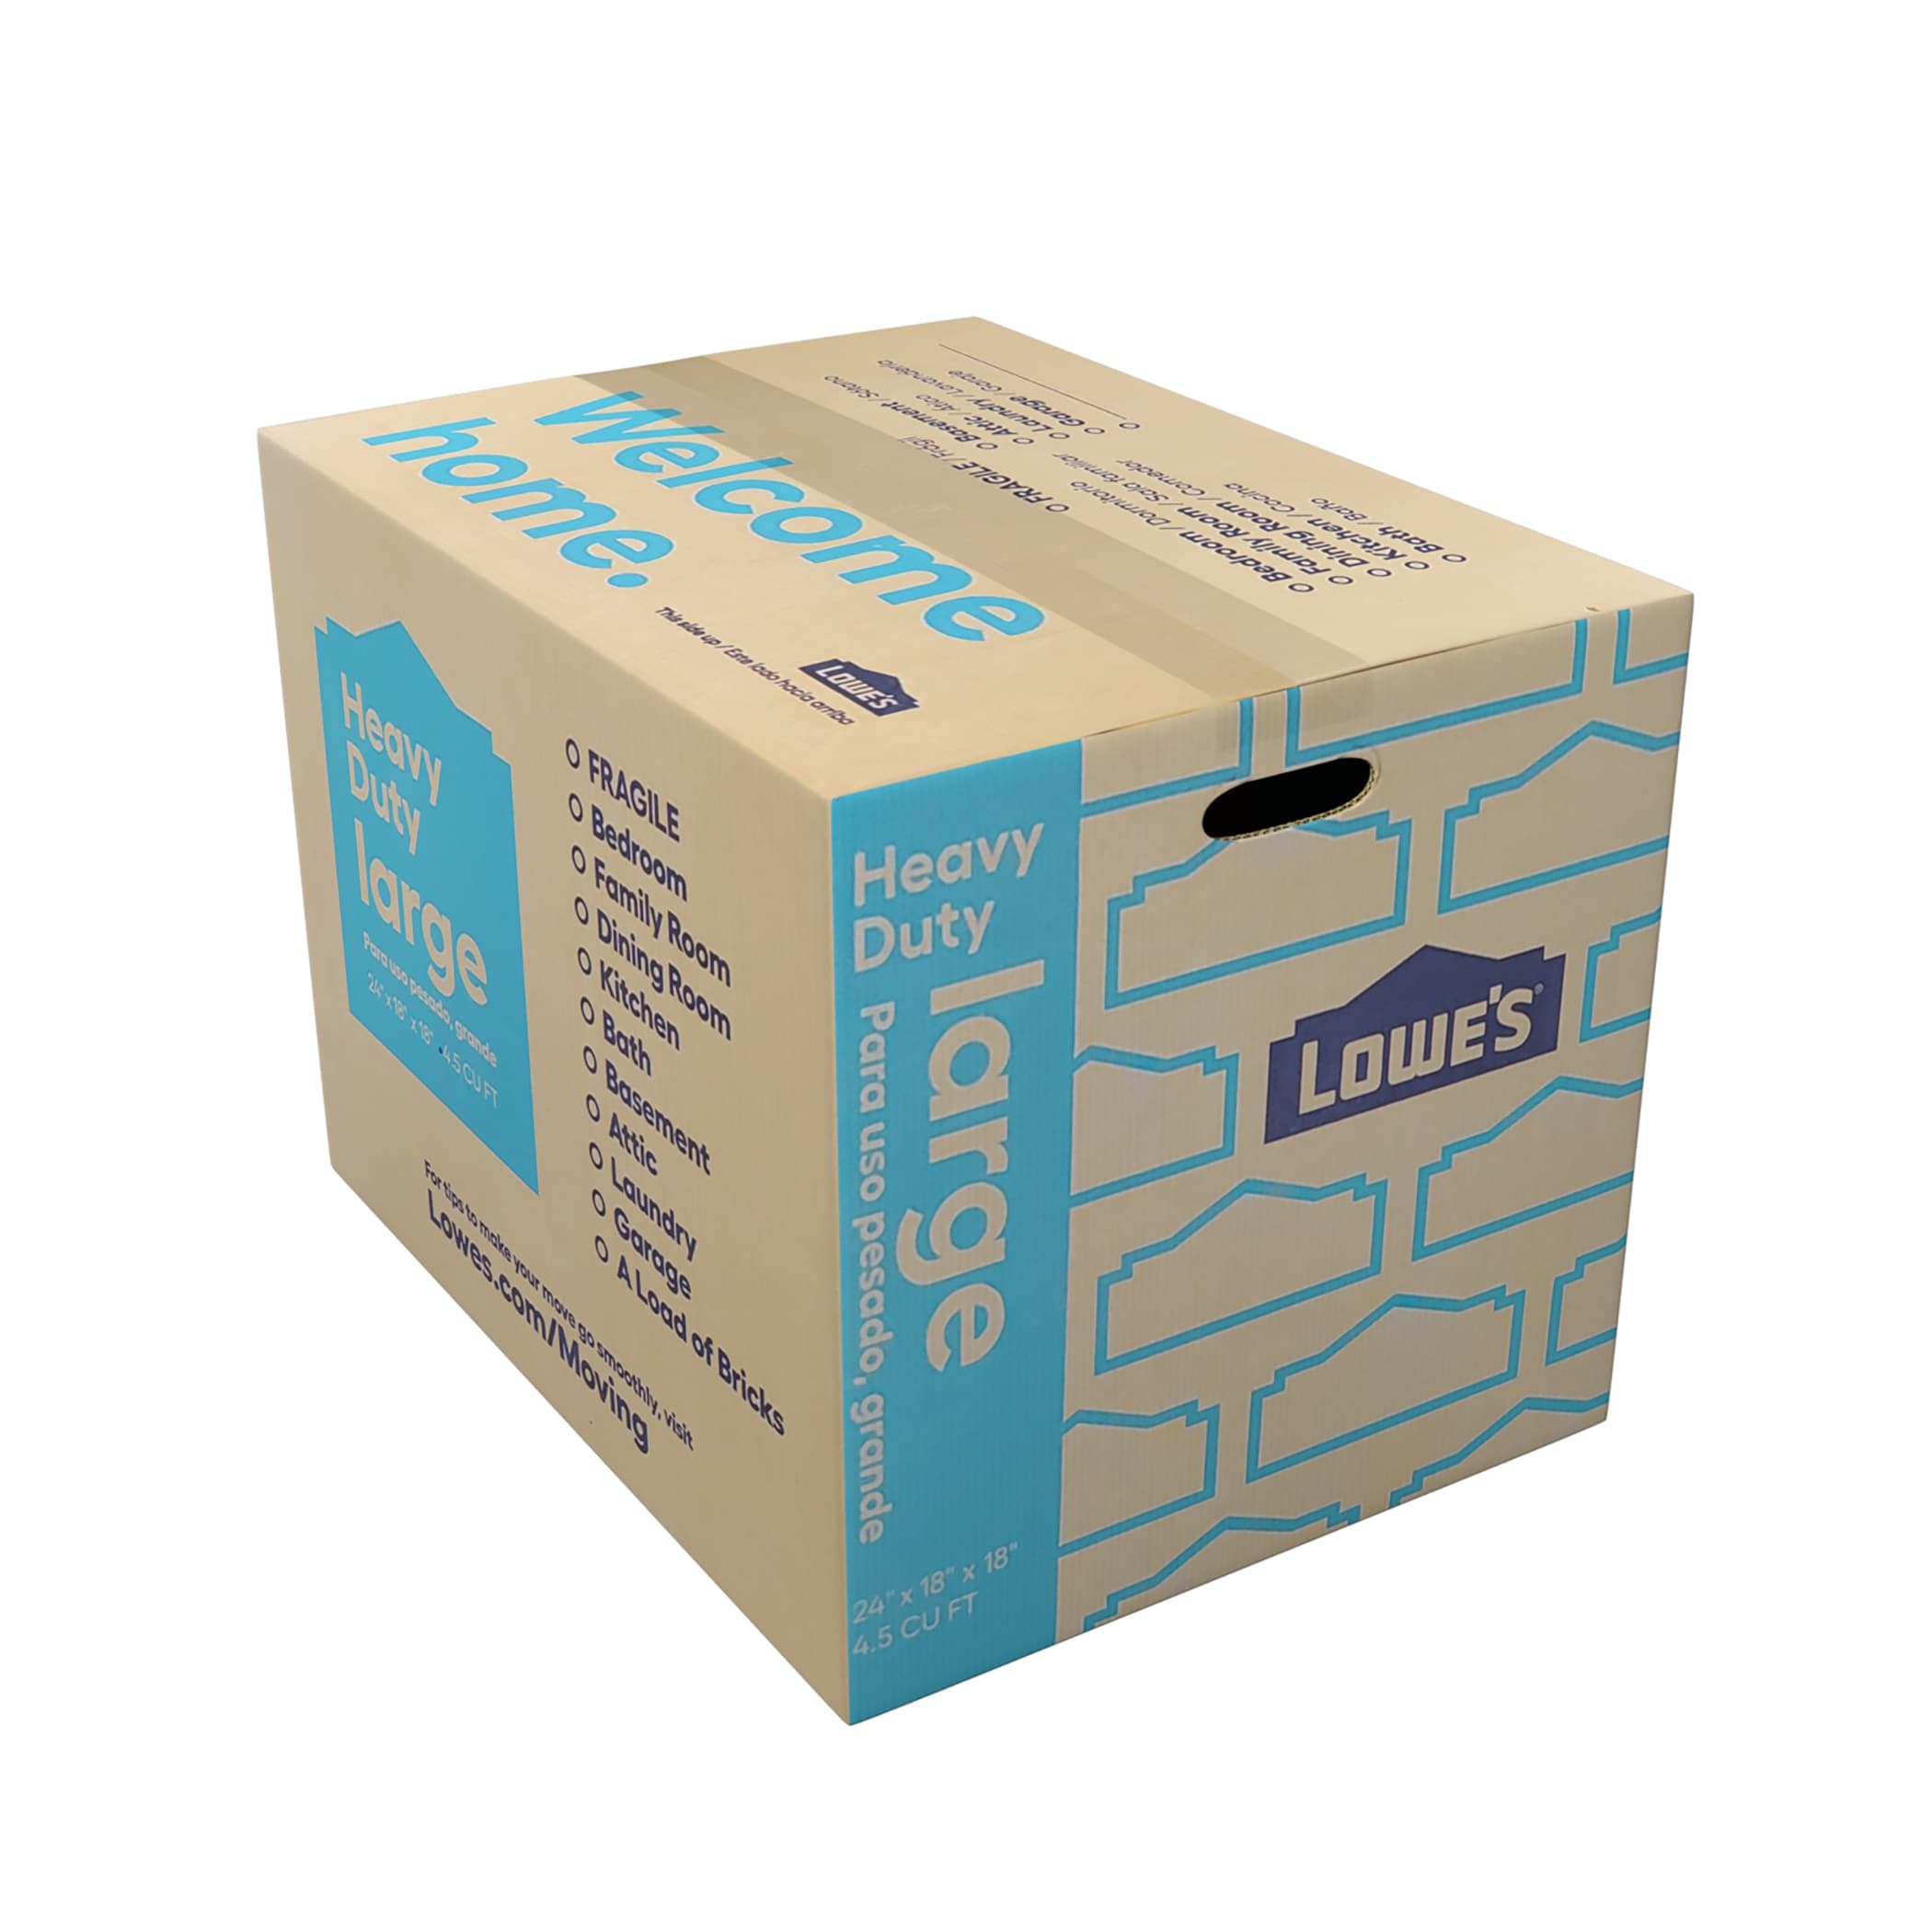 10 XX LARGE D/W CARDBOARD REMOVAL STOCK BOXES 30x20x20" 